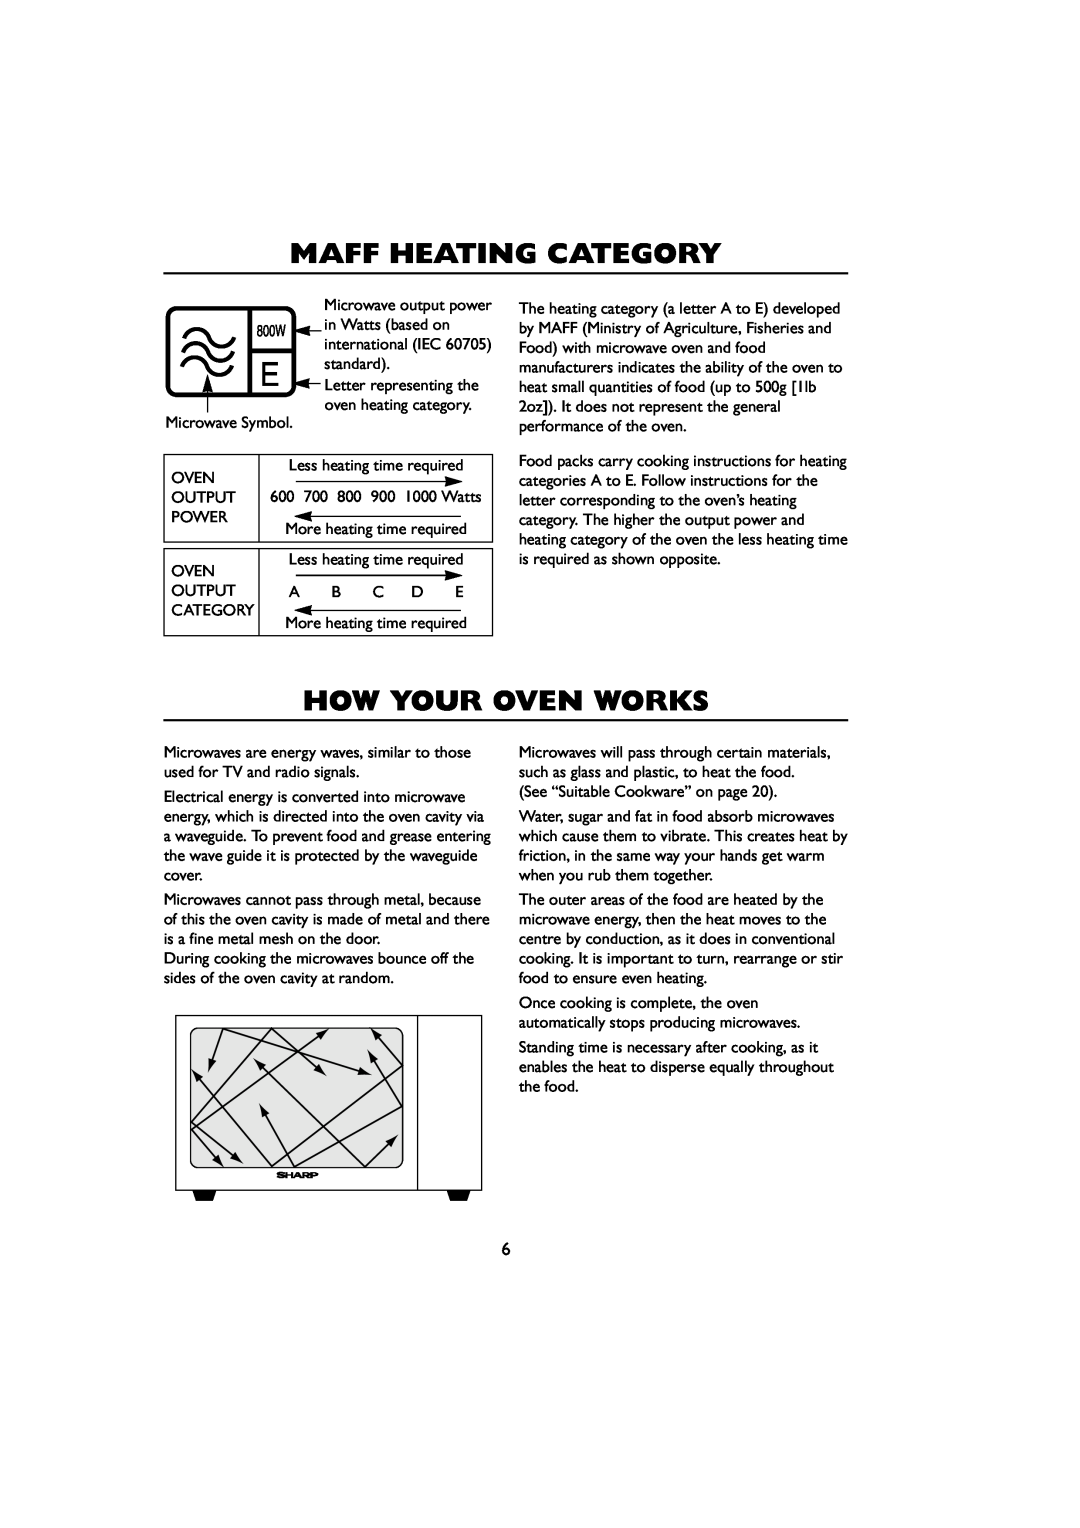 Sharp R-259 operation manual Maff Heating Category, How Your Oven Works 